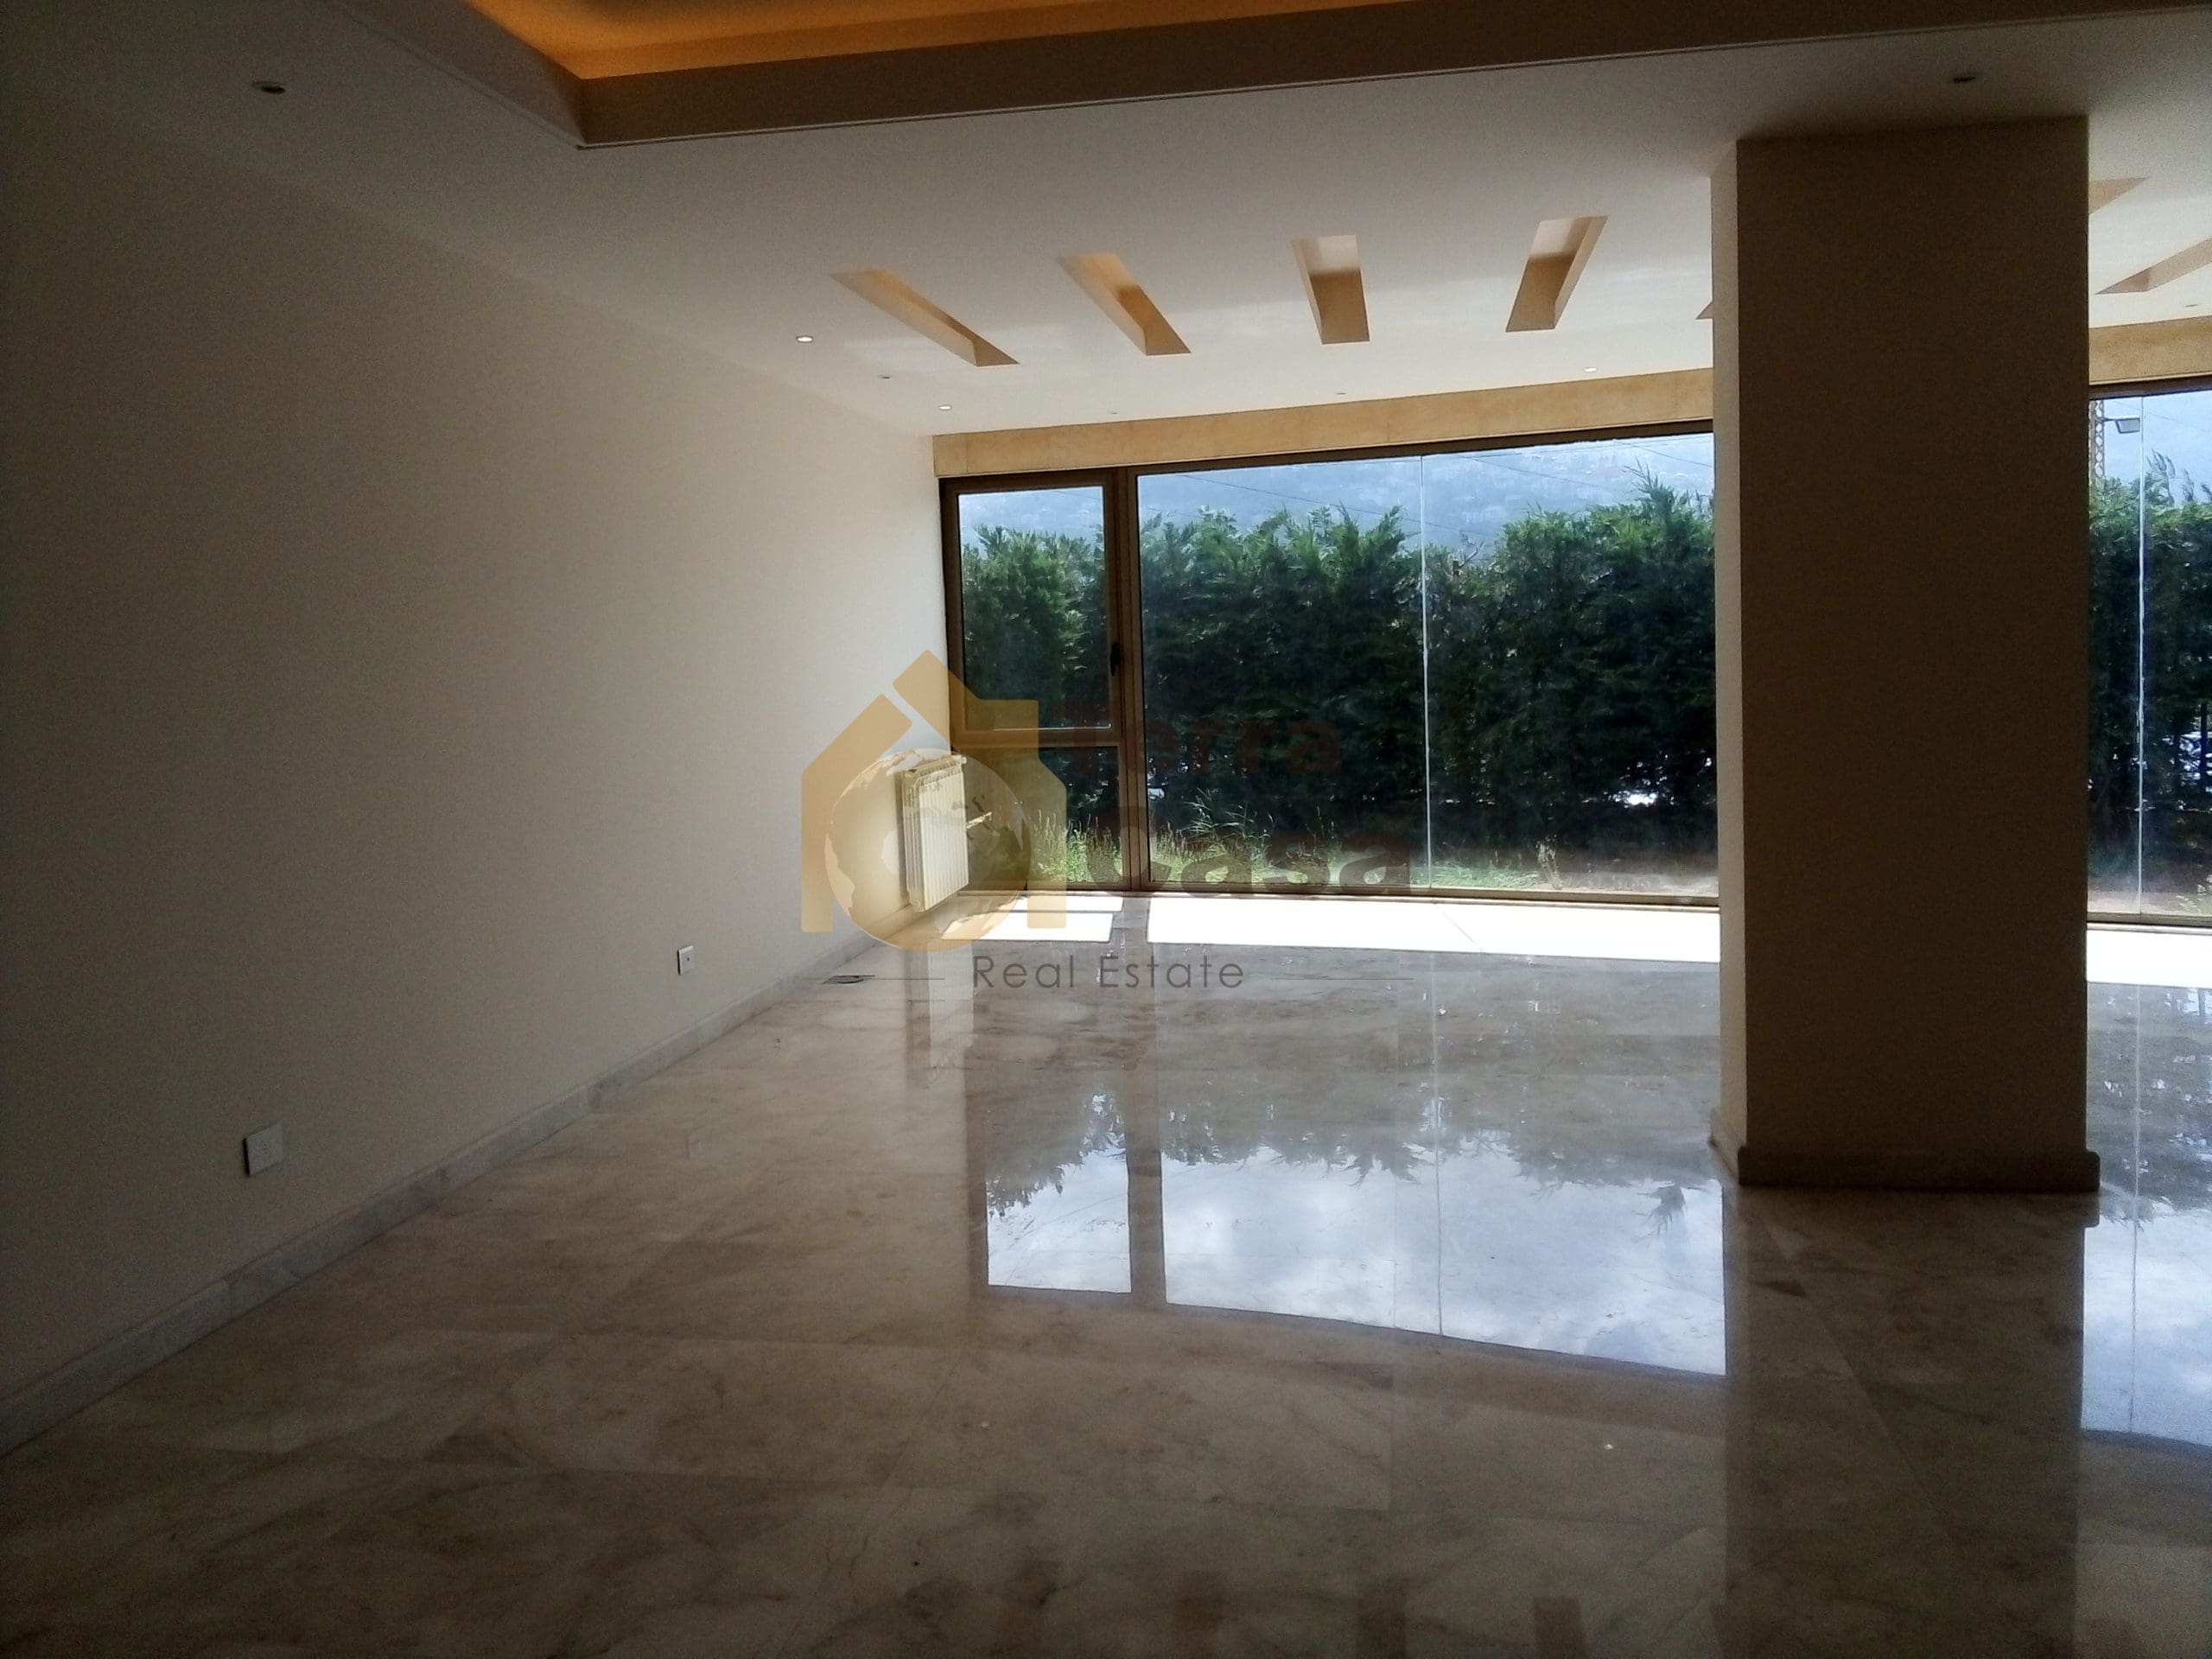 Apartment for sale in louaize brand new with 400 sqm garden.